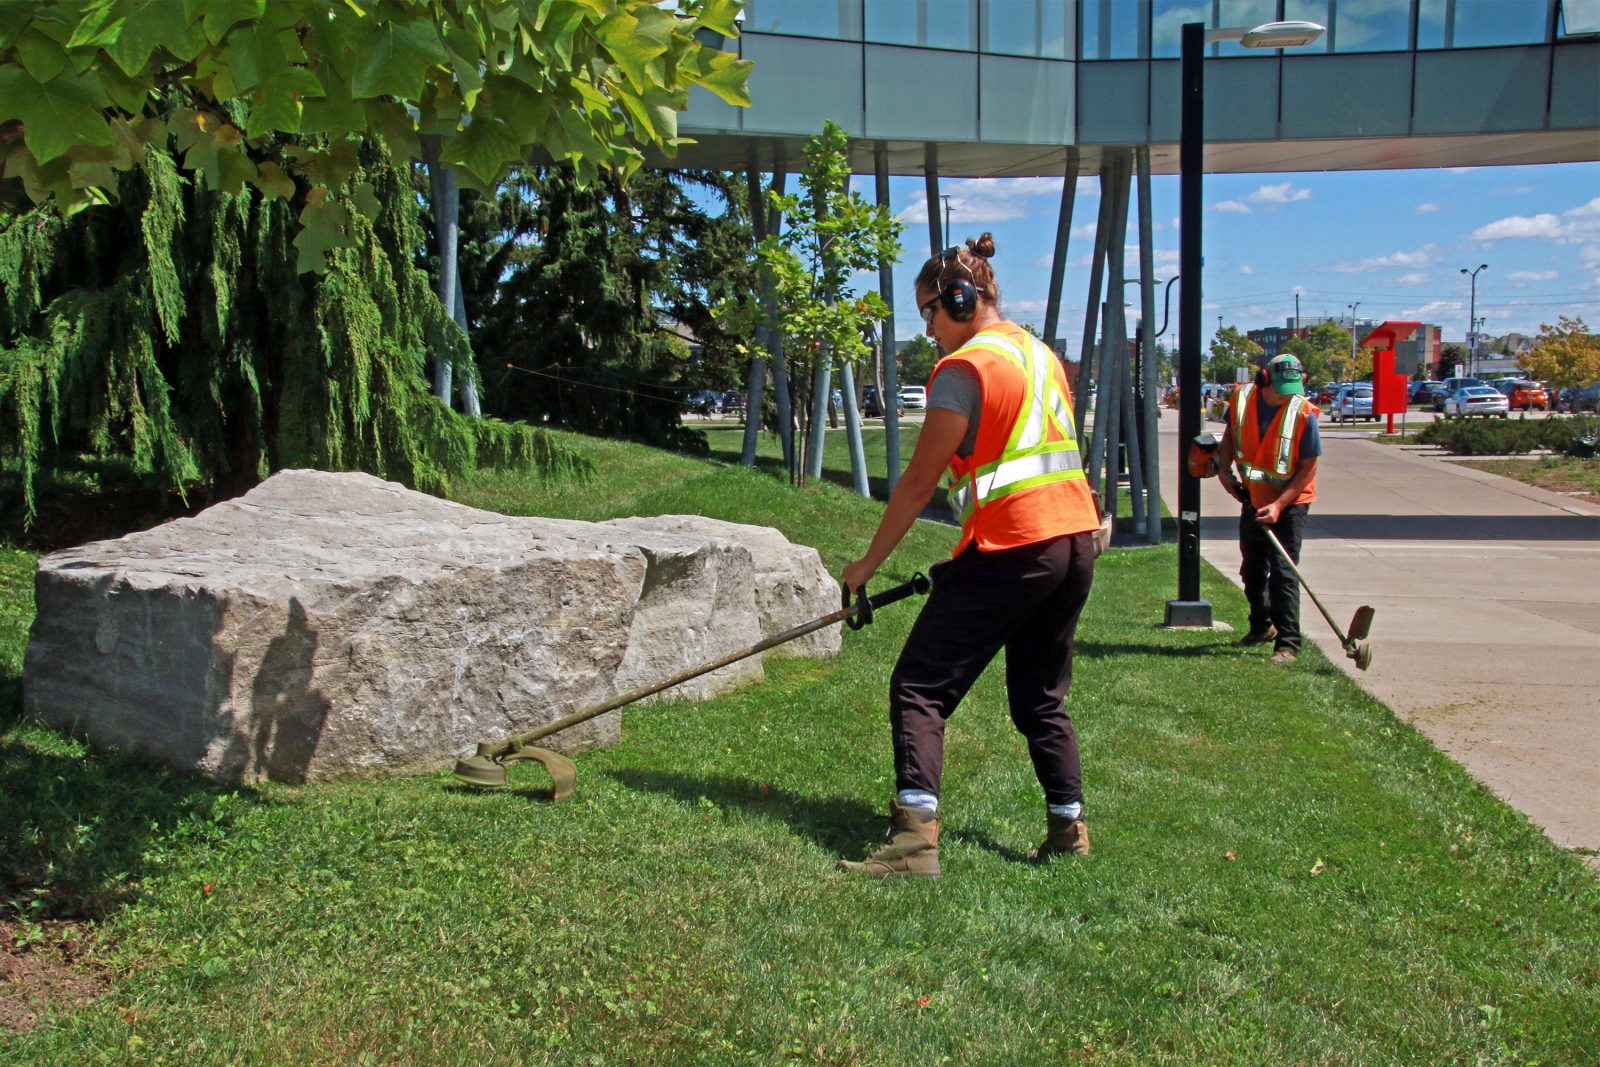 Two Brock University students use lawncare equipment to edge a sidewalk and large decorative rock near Brock's Mackenzie Chown Complex. The students are wearing orange reflective vests, black plants, brown steel-toed boots and protective earmuffs.